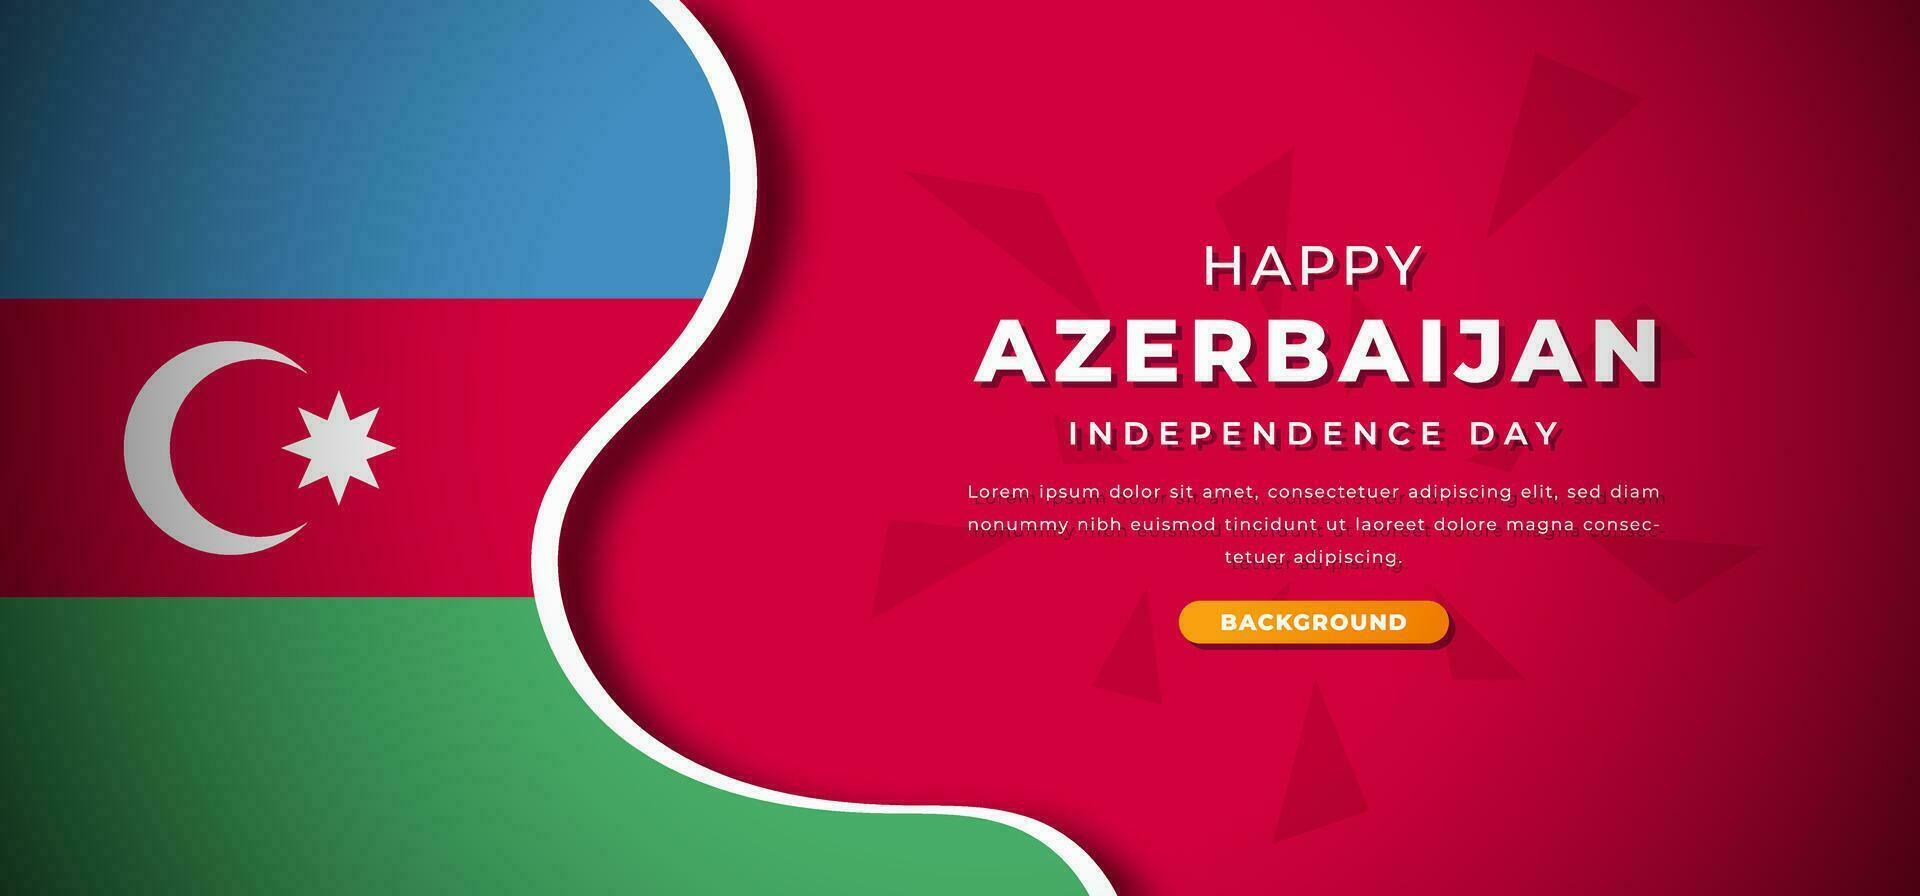 Happy Azerbaijan Independence Day Design Paper Cut Shapes Background Illustration for Poster, Banner, Advertising, Greeting Card vector